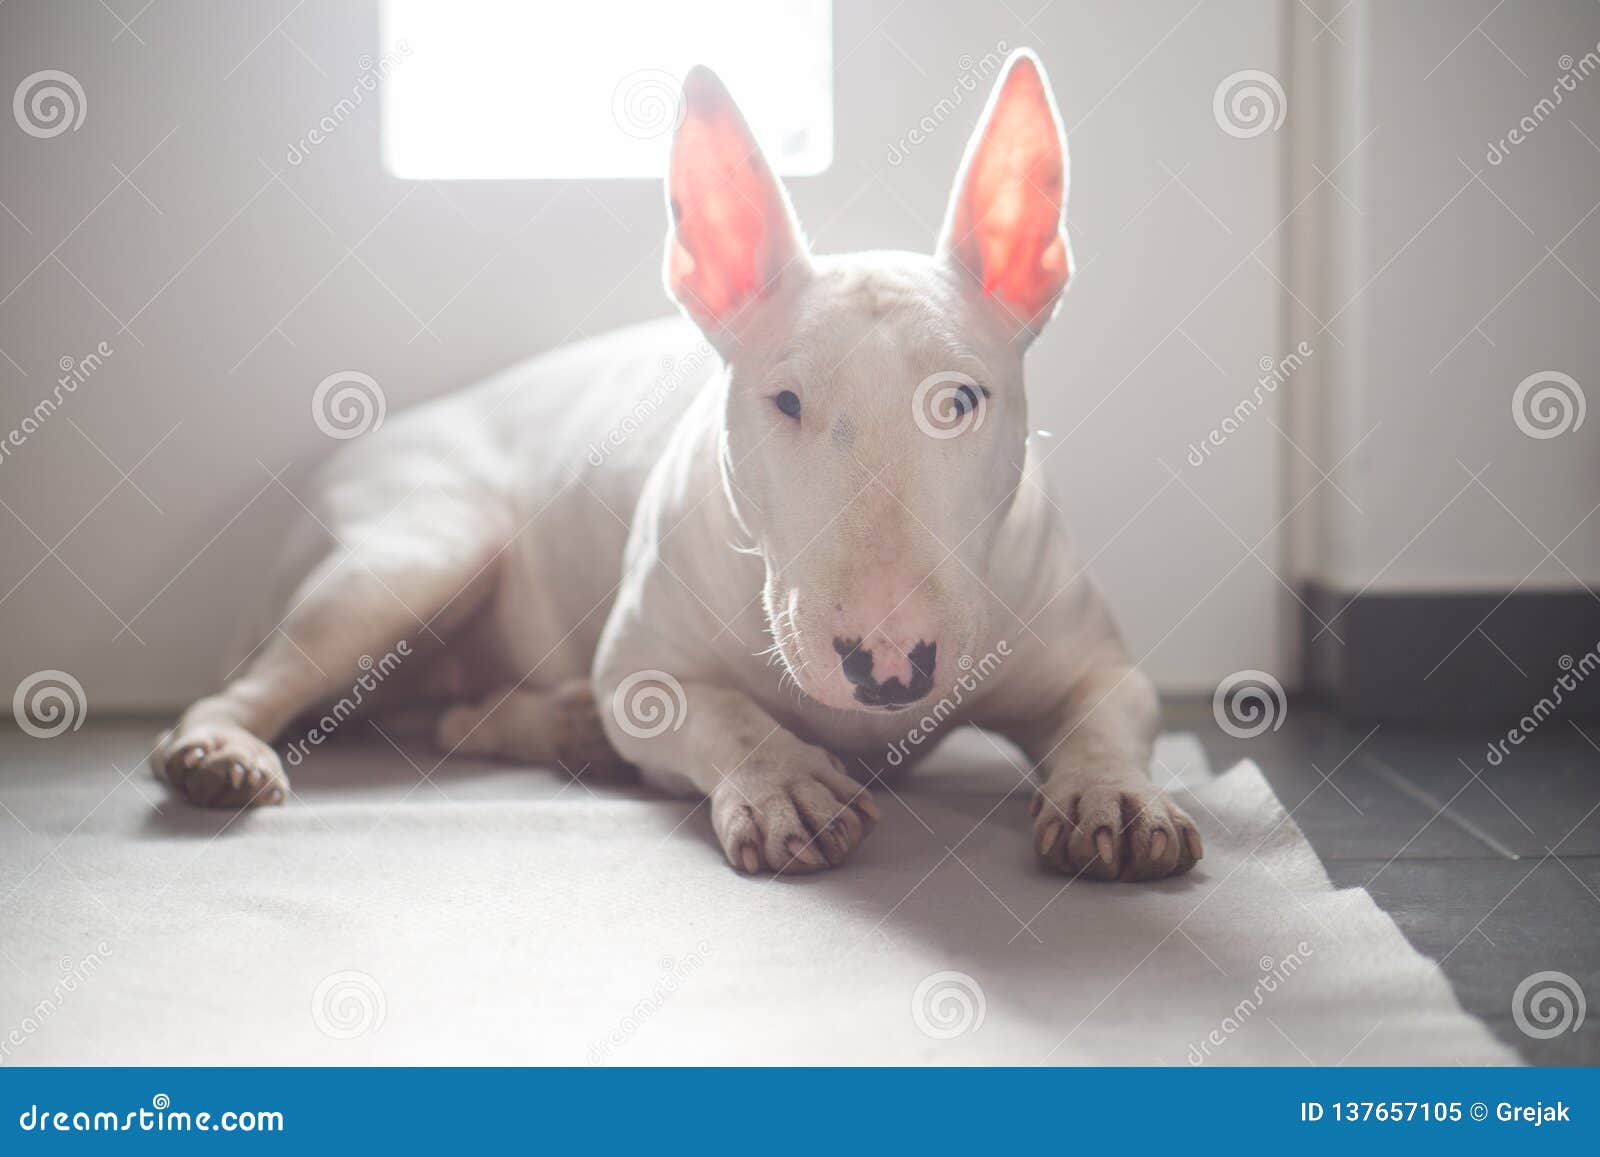 English Bull Terrier Lying On The Floor With Light Behind It Stock Image Image Of Active Domestic 137657105